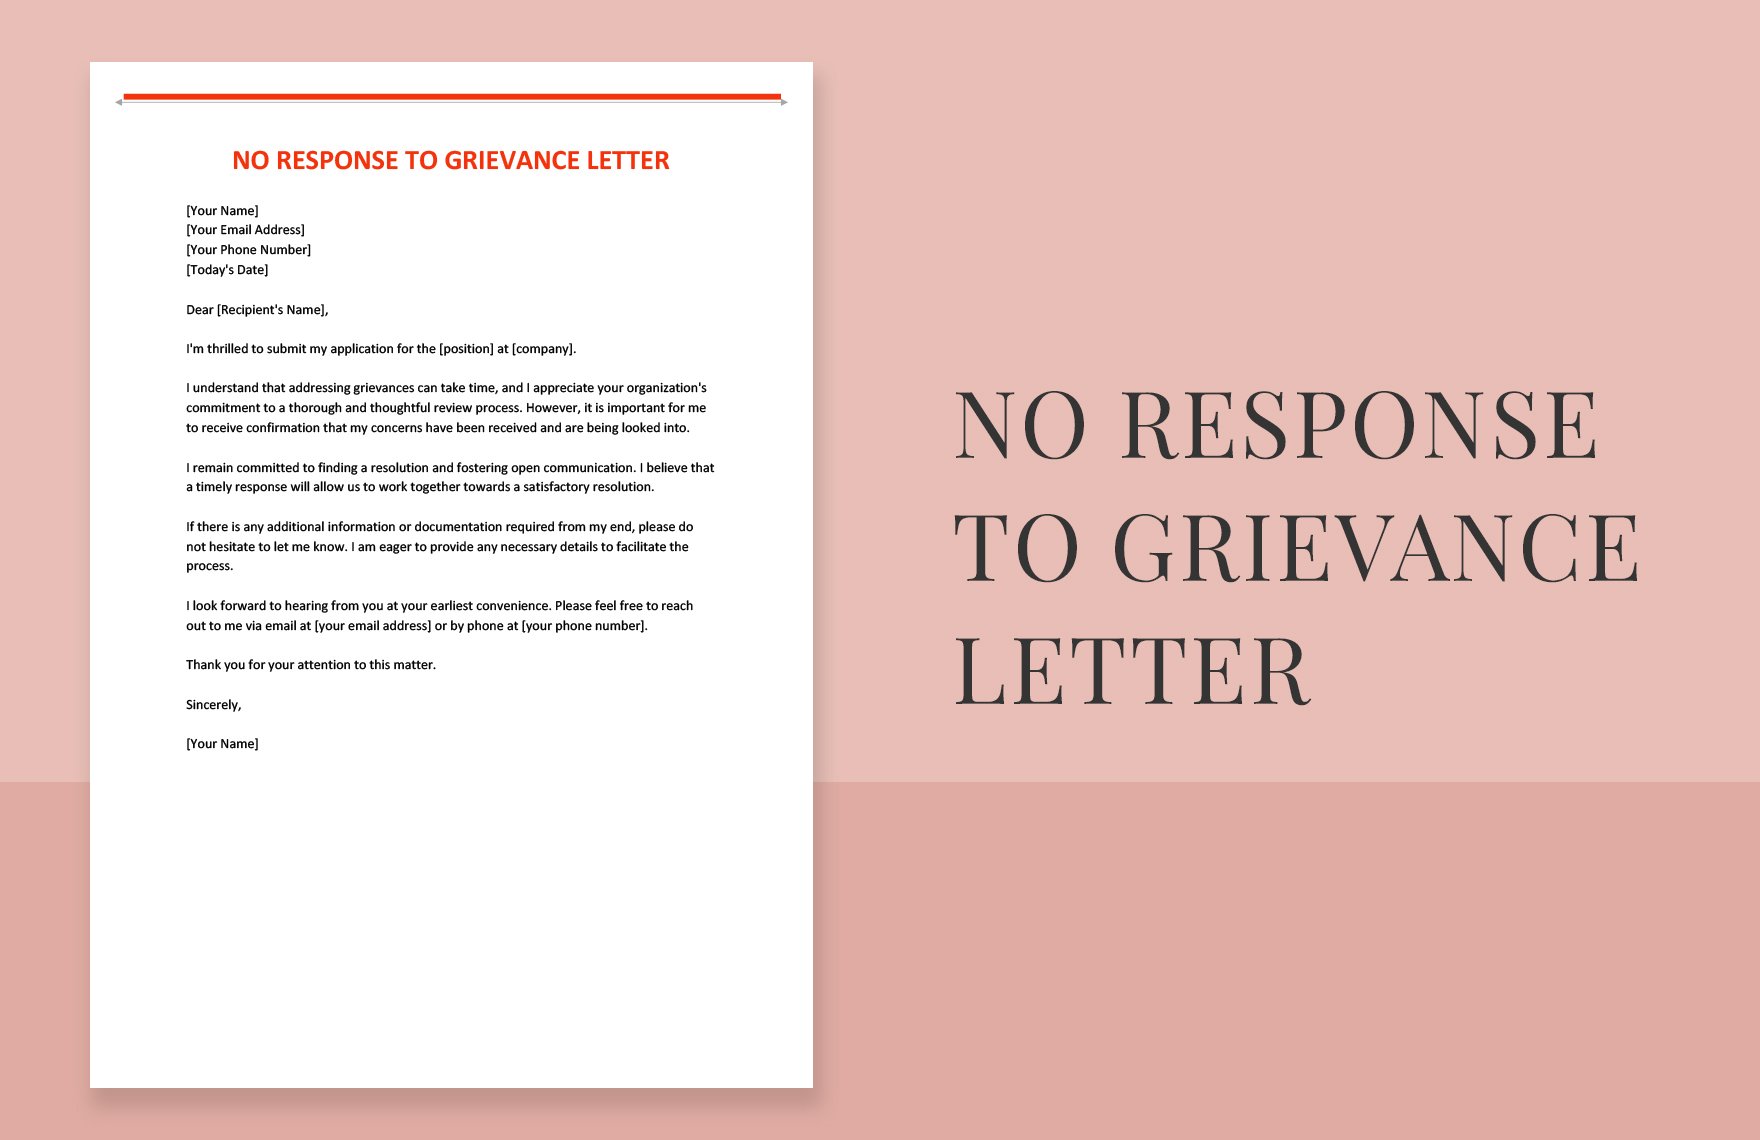 no response to grievance letter